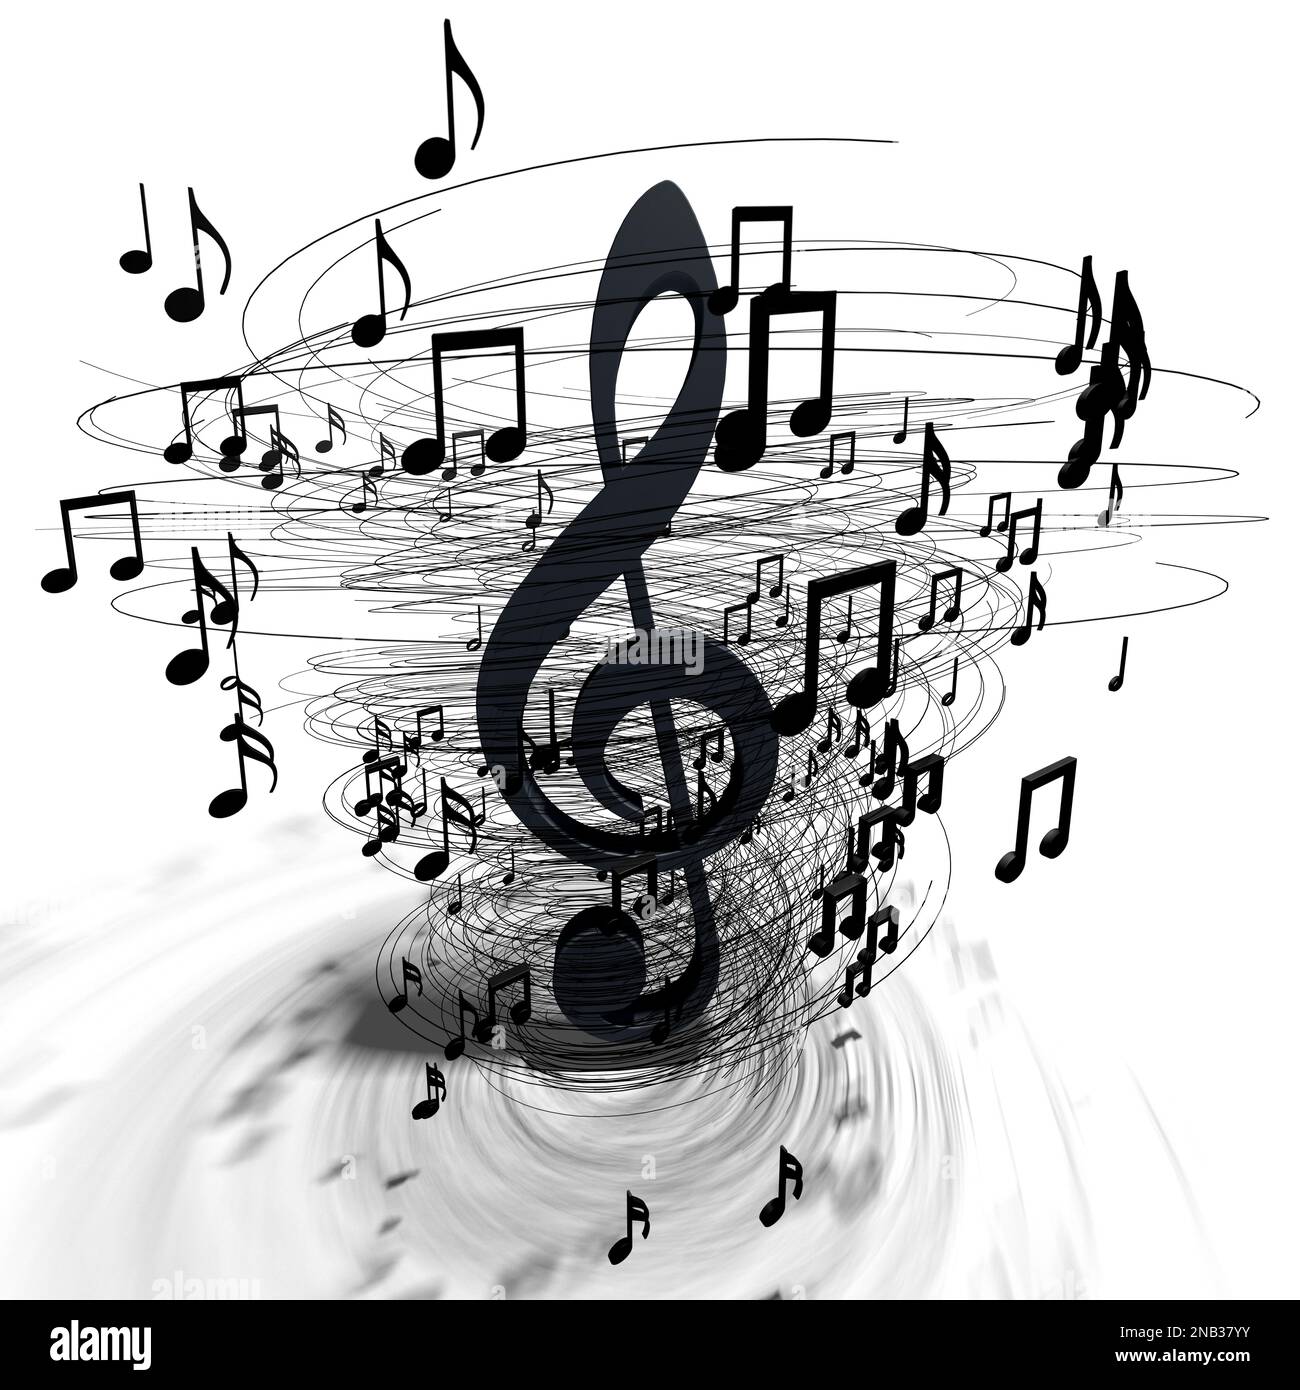 3d illustration of musical notes and musical signs of abstract music sheet.Songs and melody concept.Music background design.Musical writing. Stock Photo